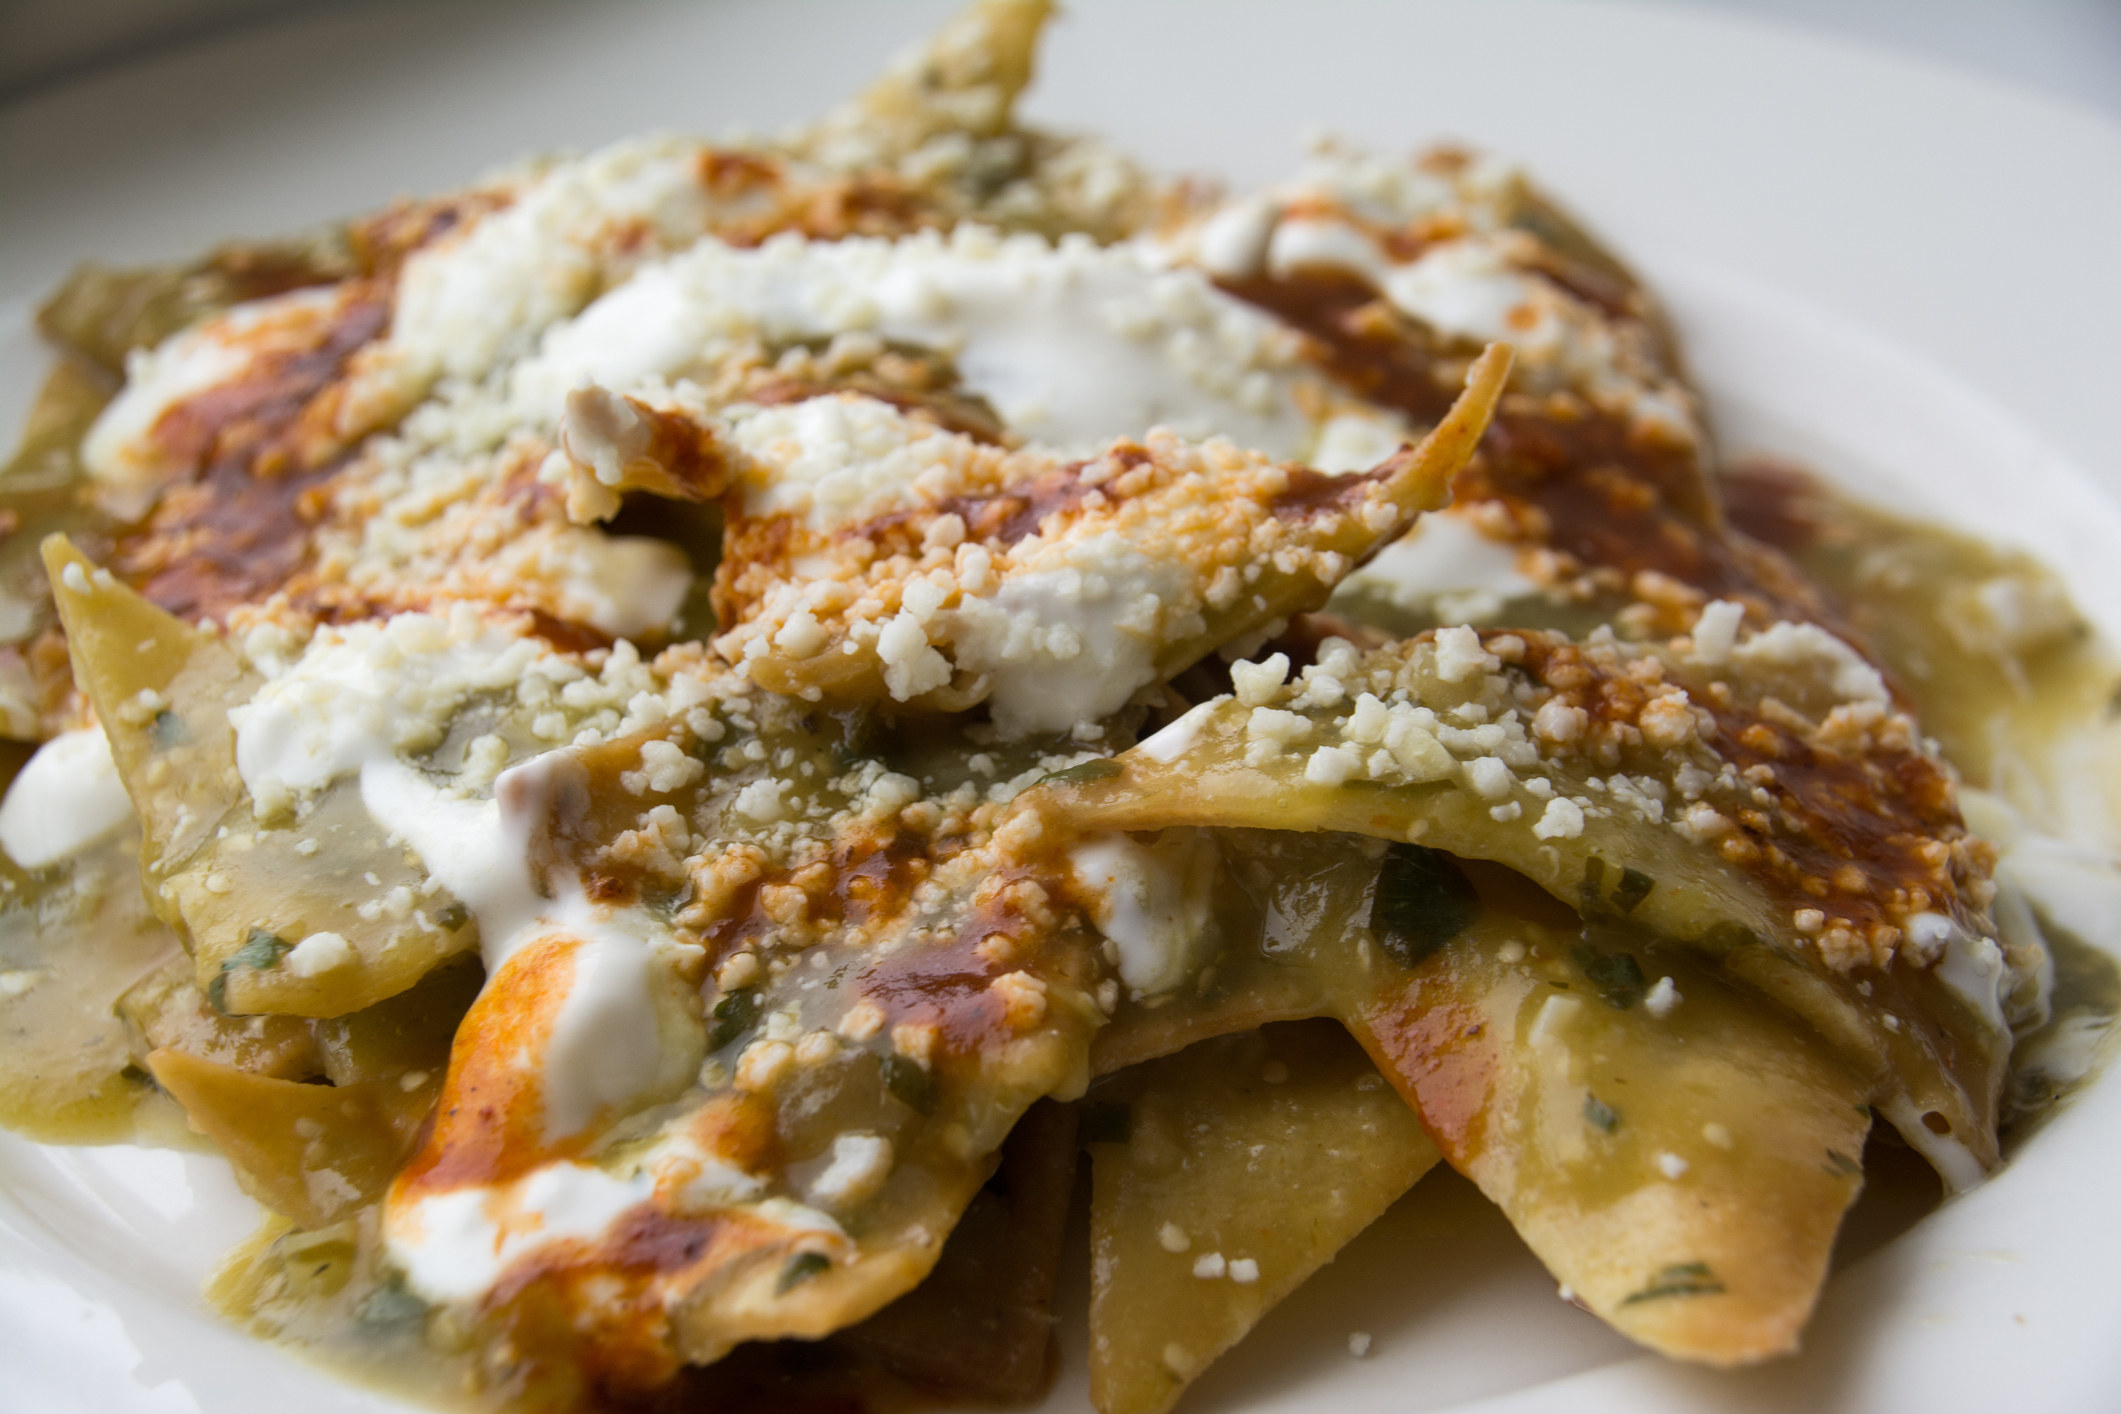 Chilaquiles with salsa verde and cheese